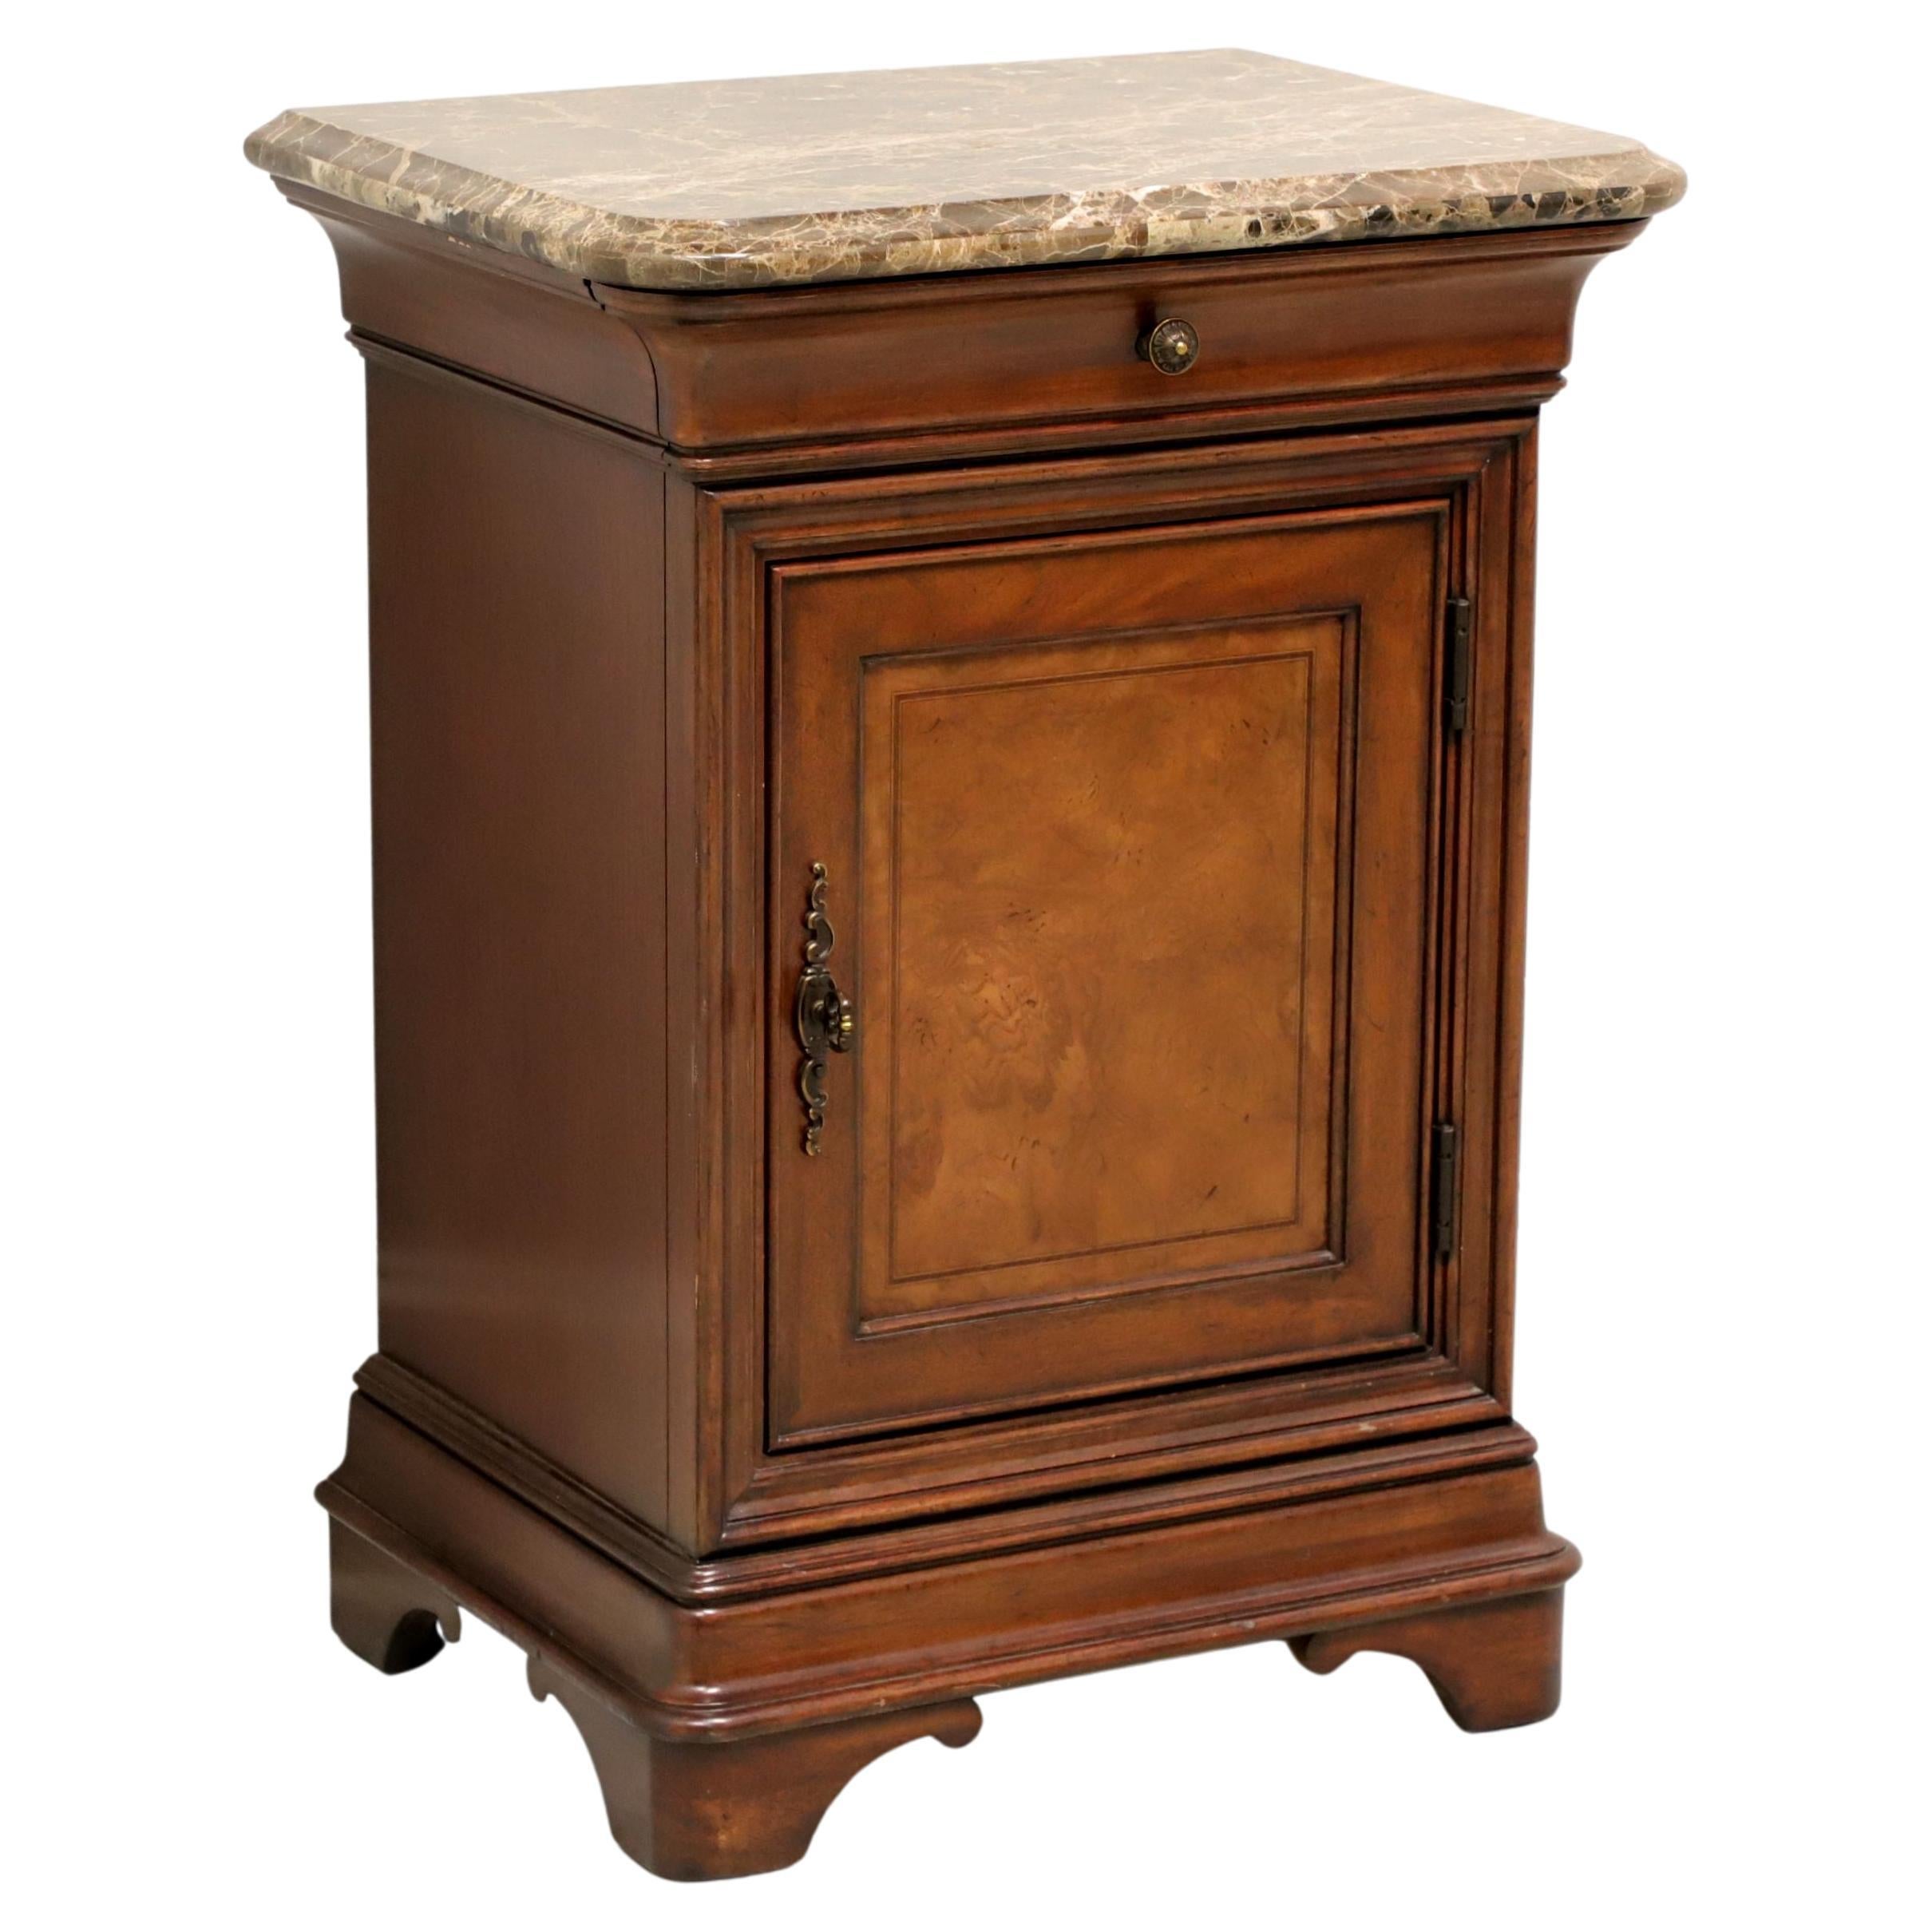 THOMASVILLE Inlaid Burl Elm Transitional Cultured Marble Top Bedside Cabinet